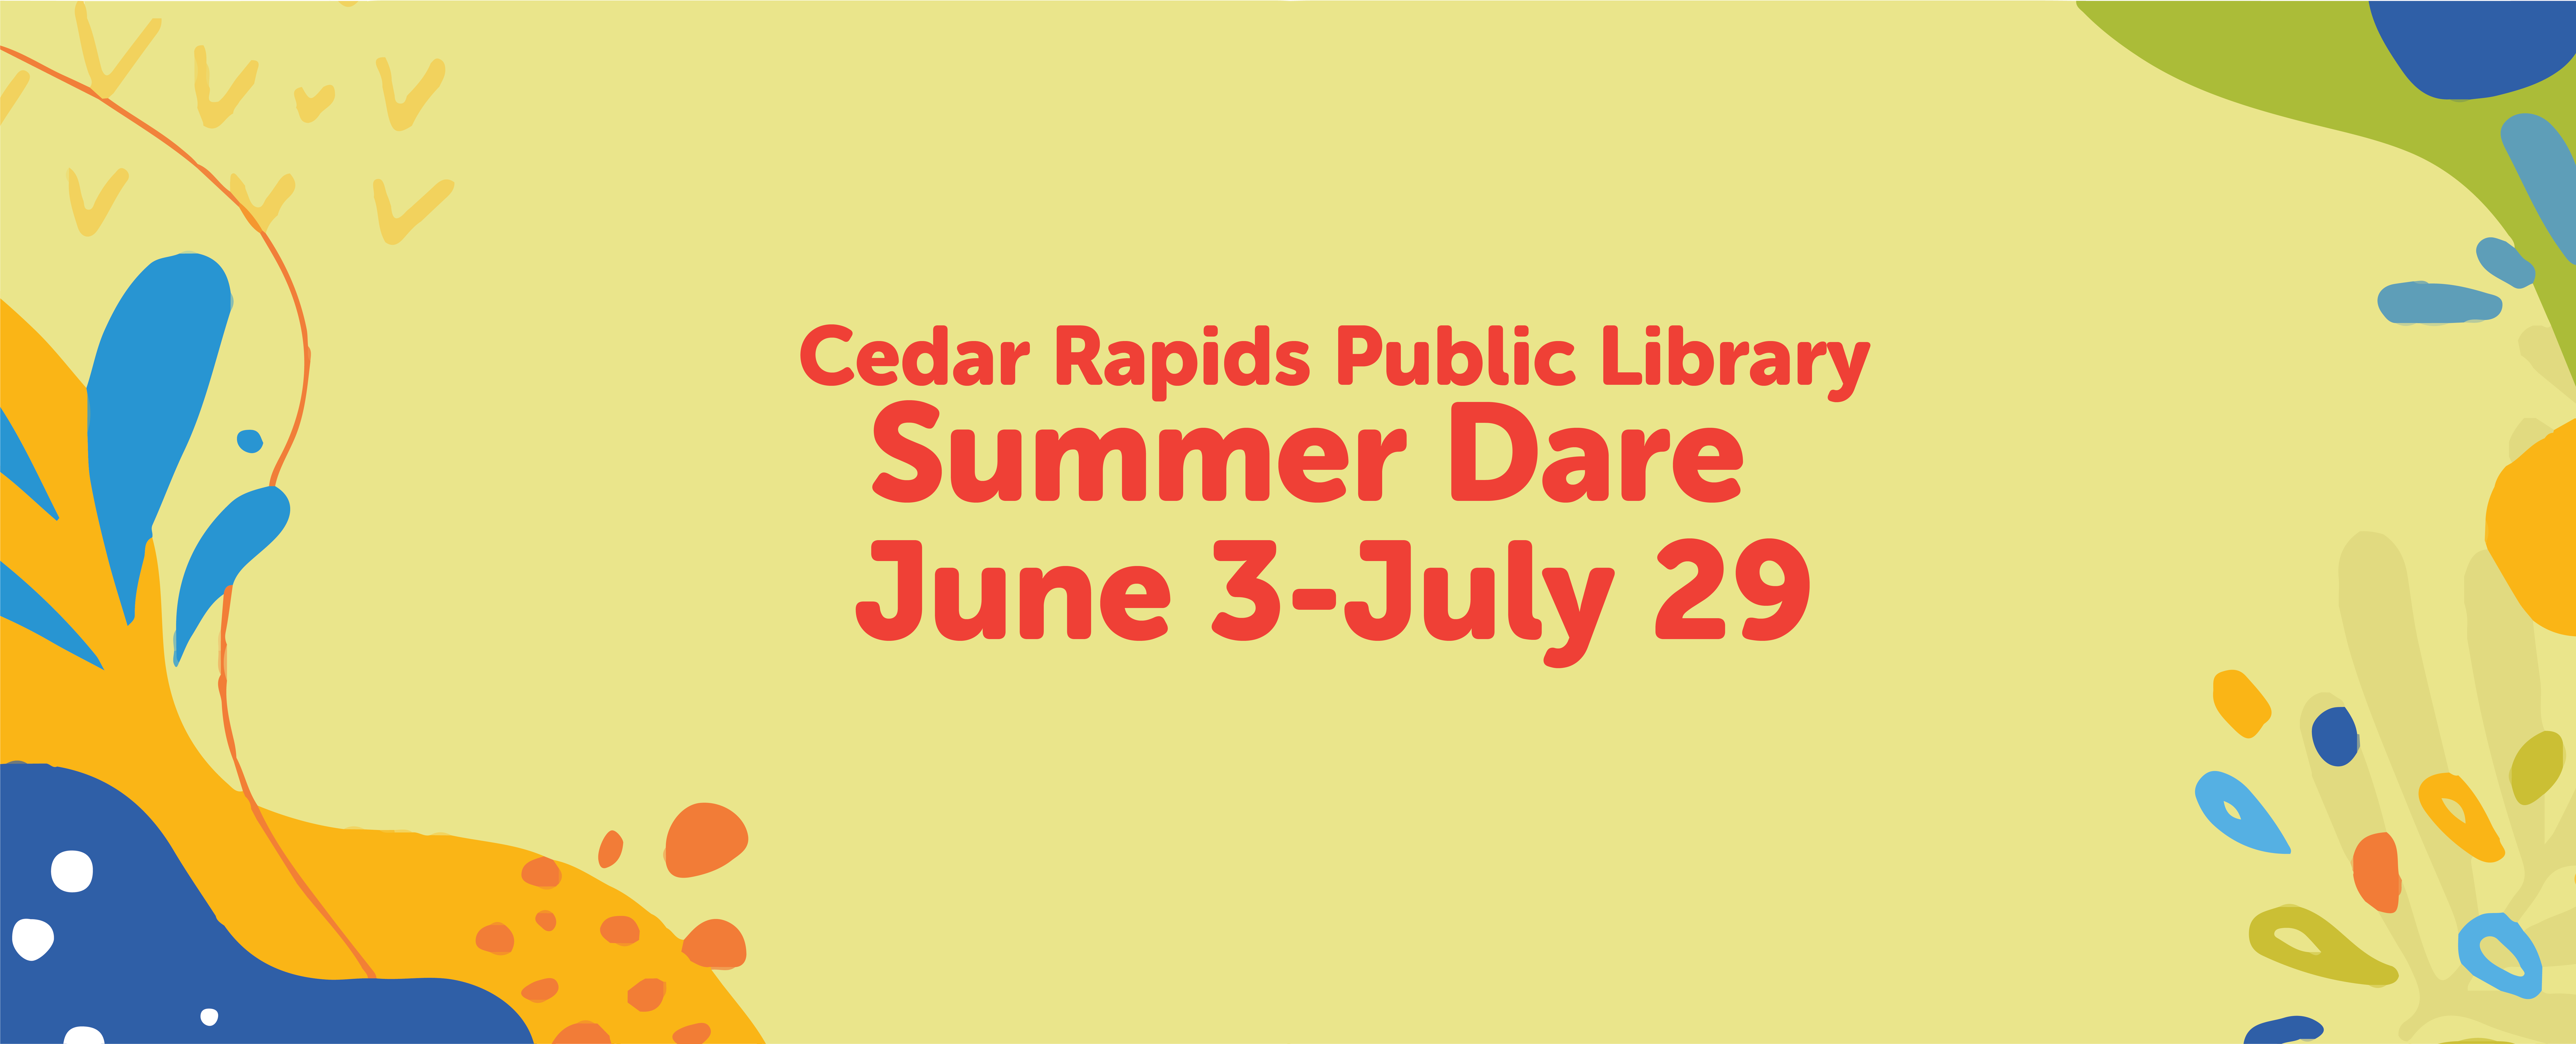 Colorful graphic that says Cedar Rapids Public Library Summer Dare June 3-July 29.